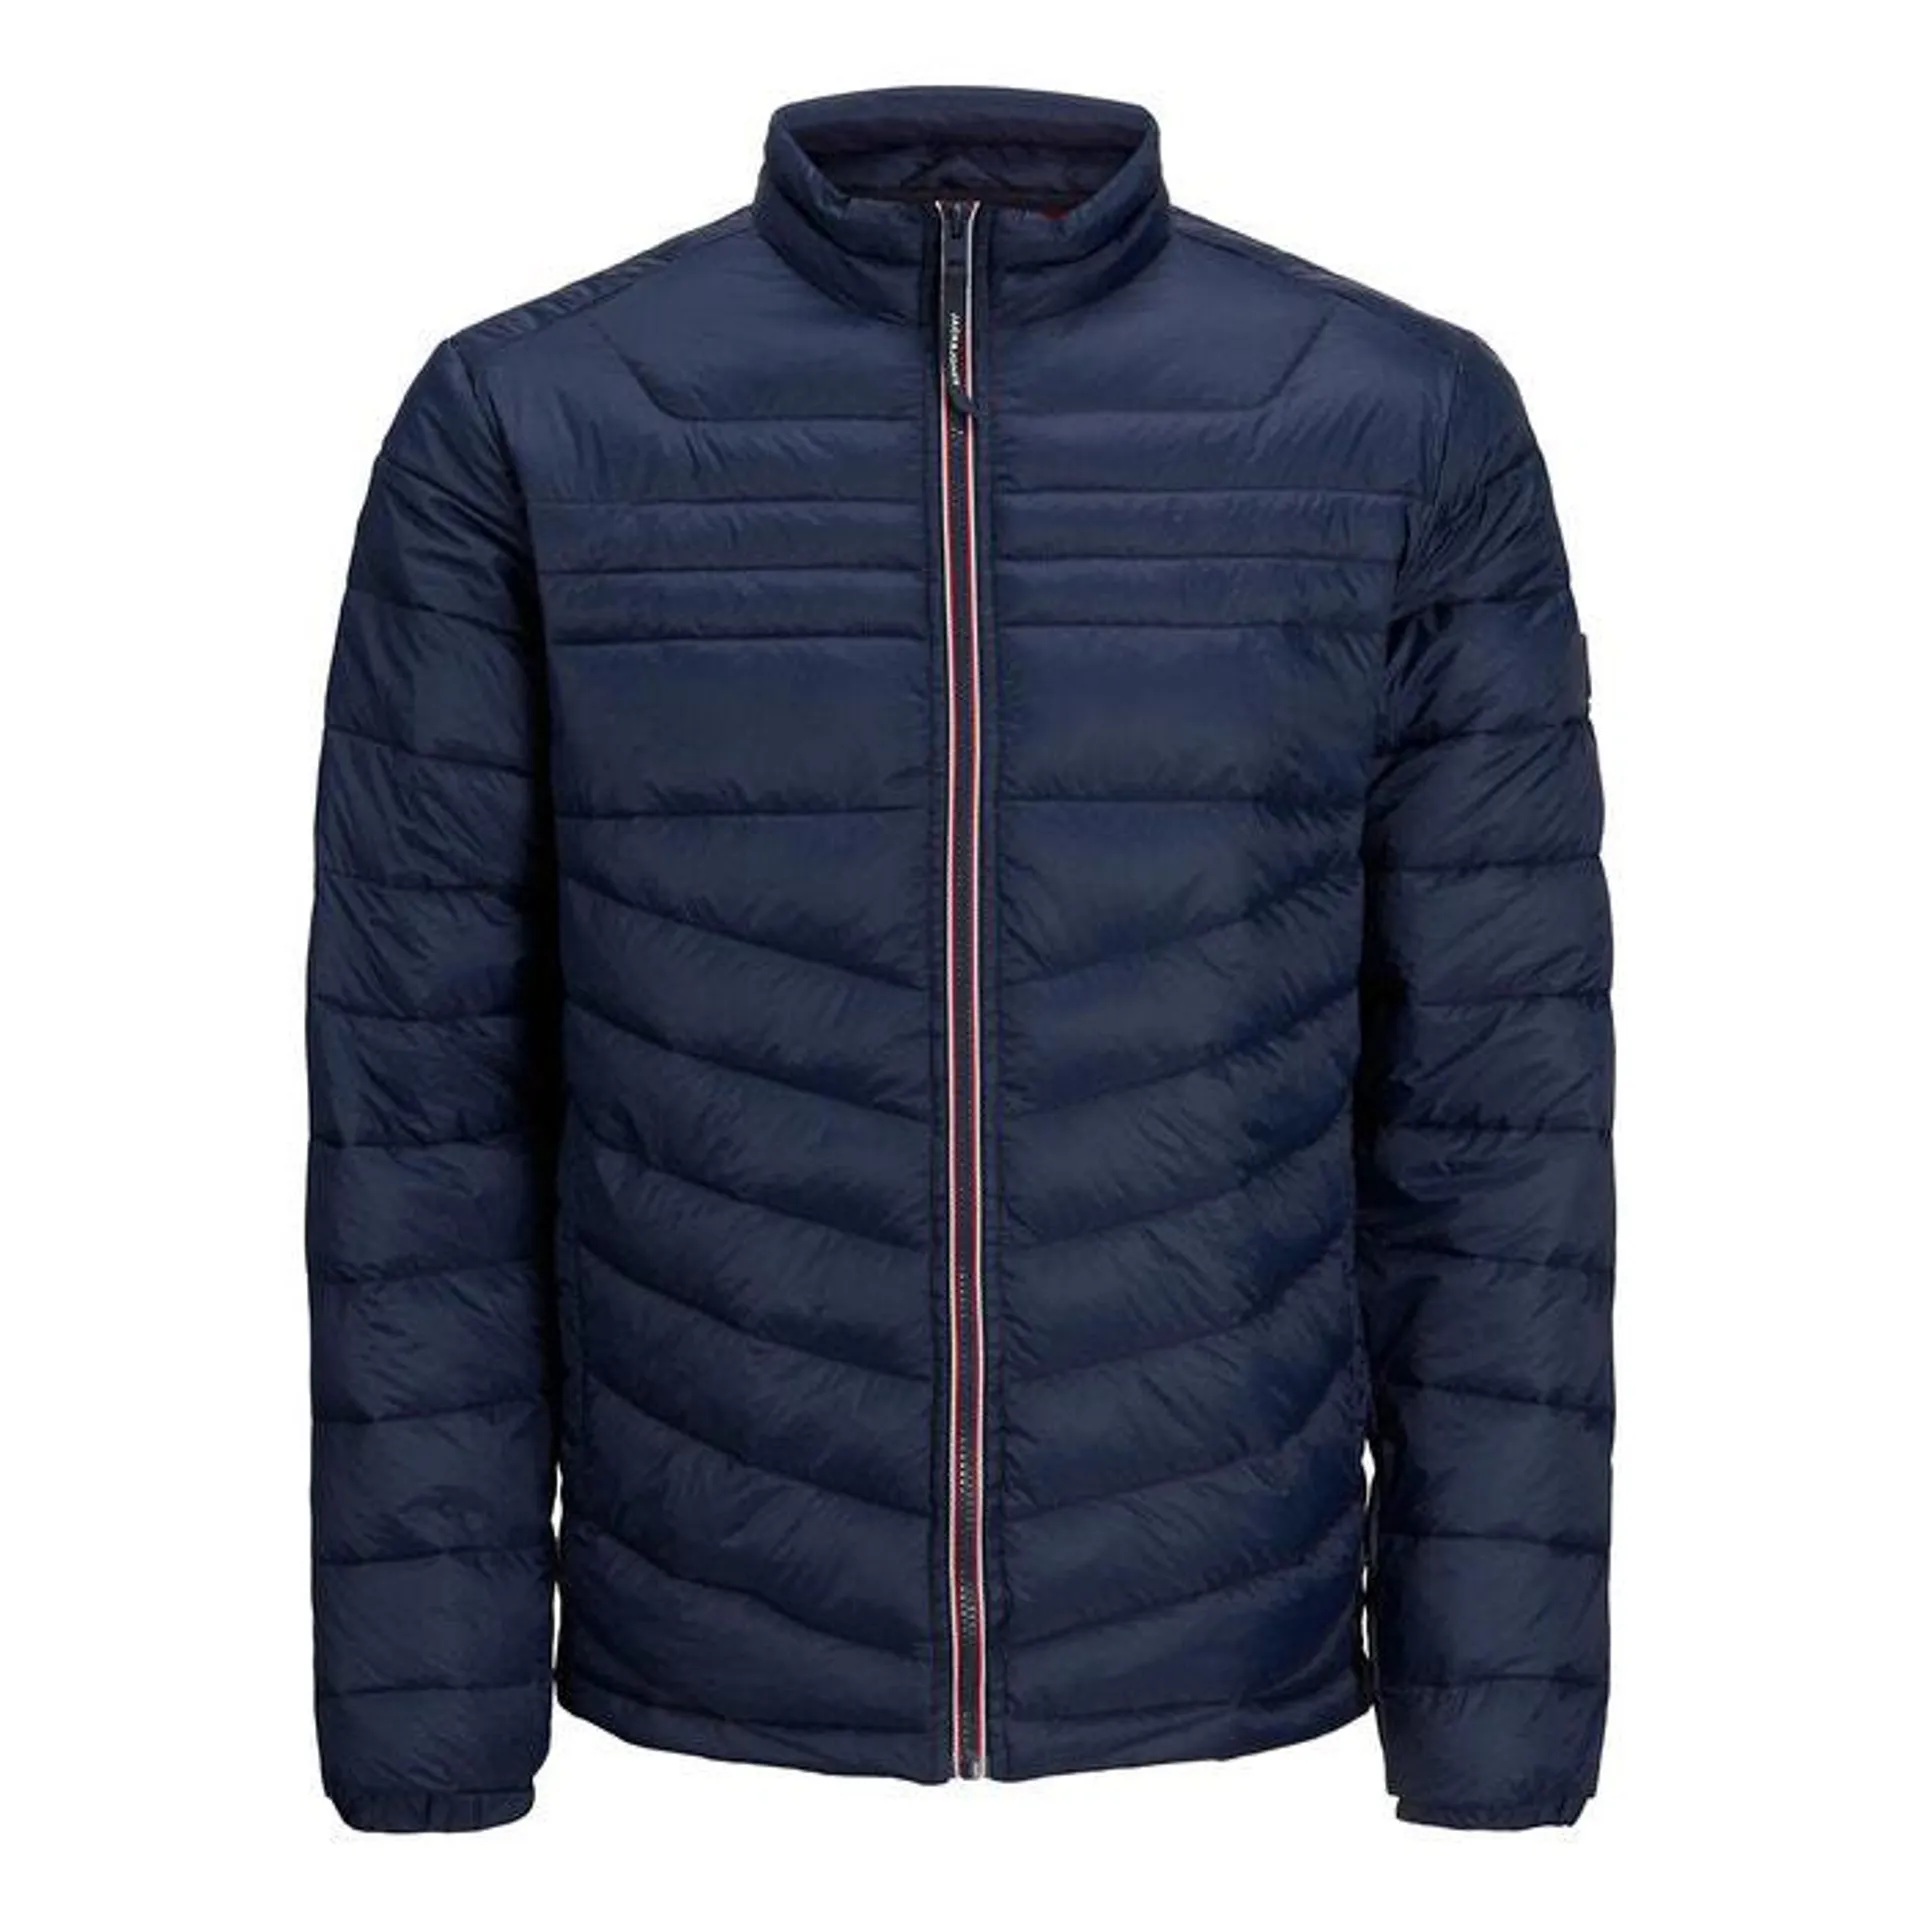 Hero Lightweight Padded Jacket with High Neck